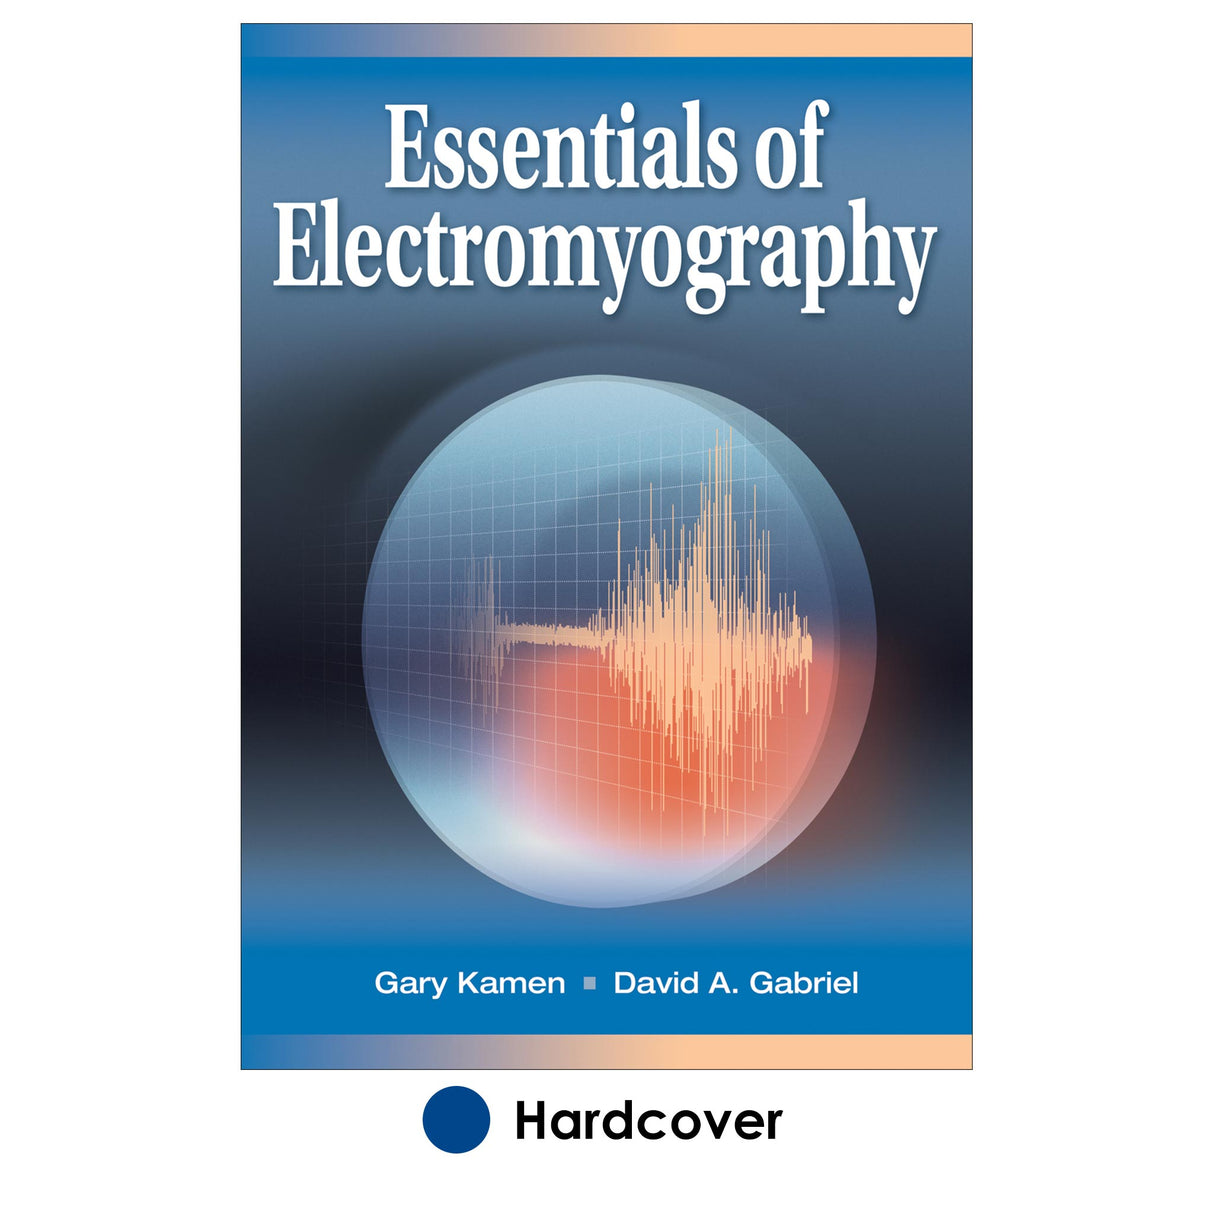 Essentials of Electromoyograhy